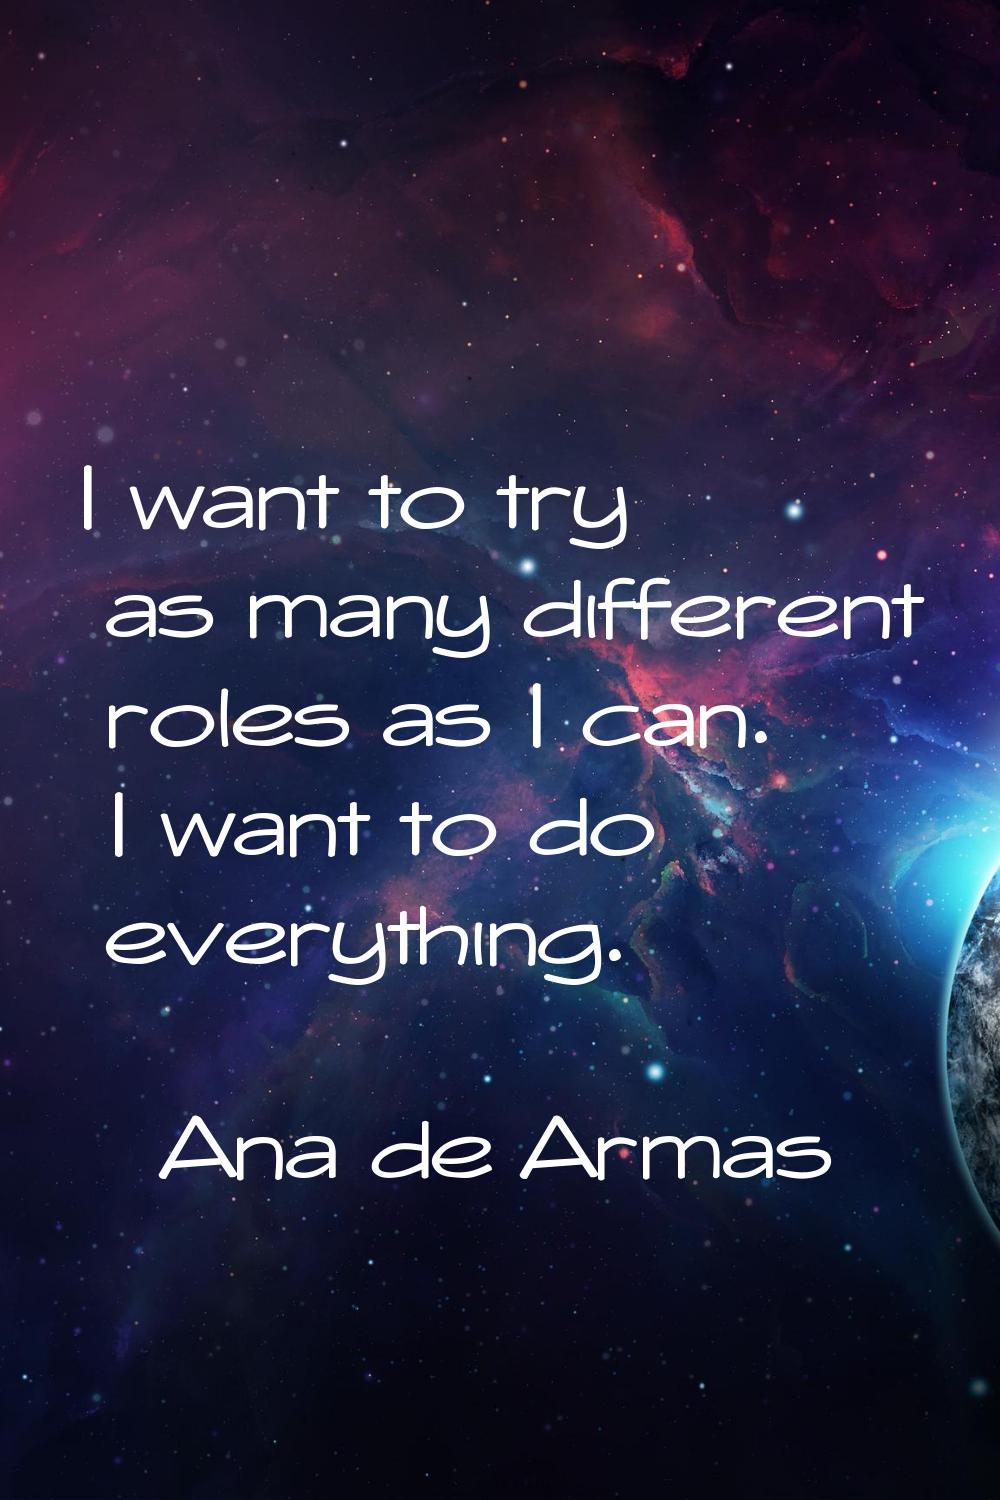 I want to try as many different roles as I can. I want to do everything.